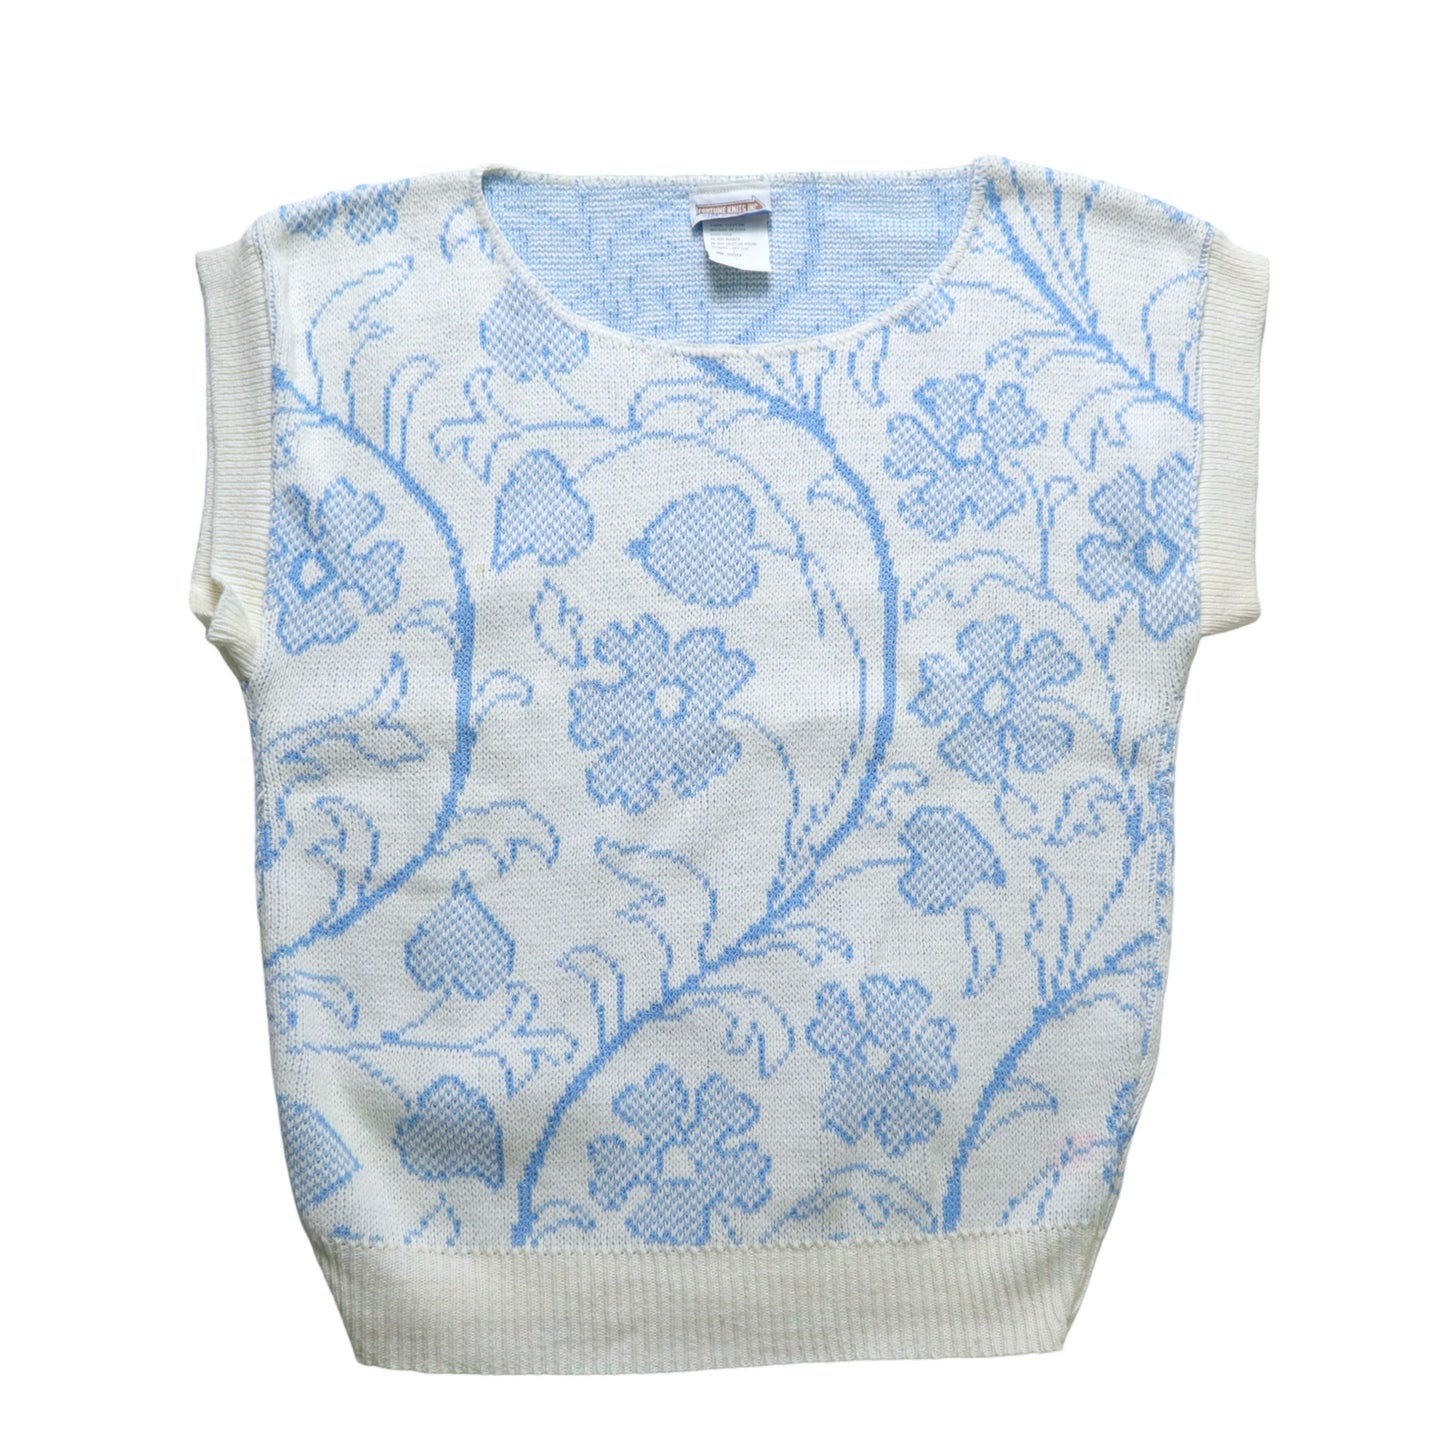 80s American-made white and aqua blue printed knitted top